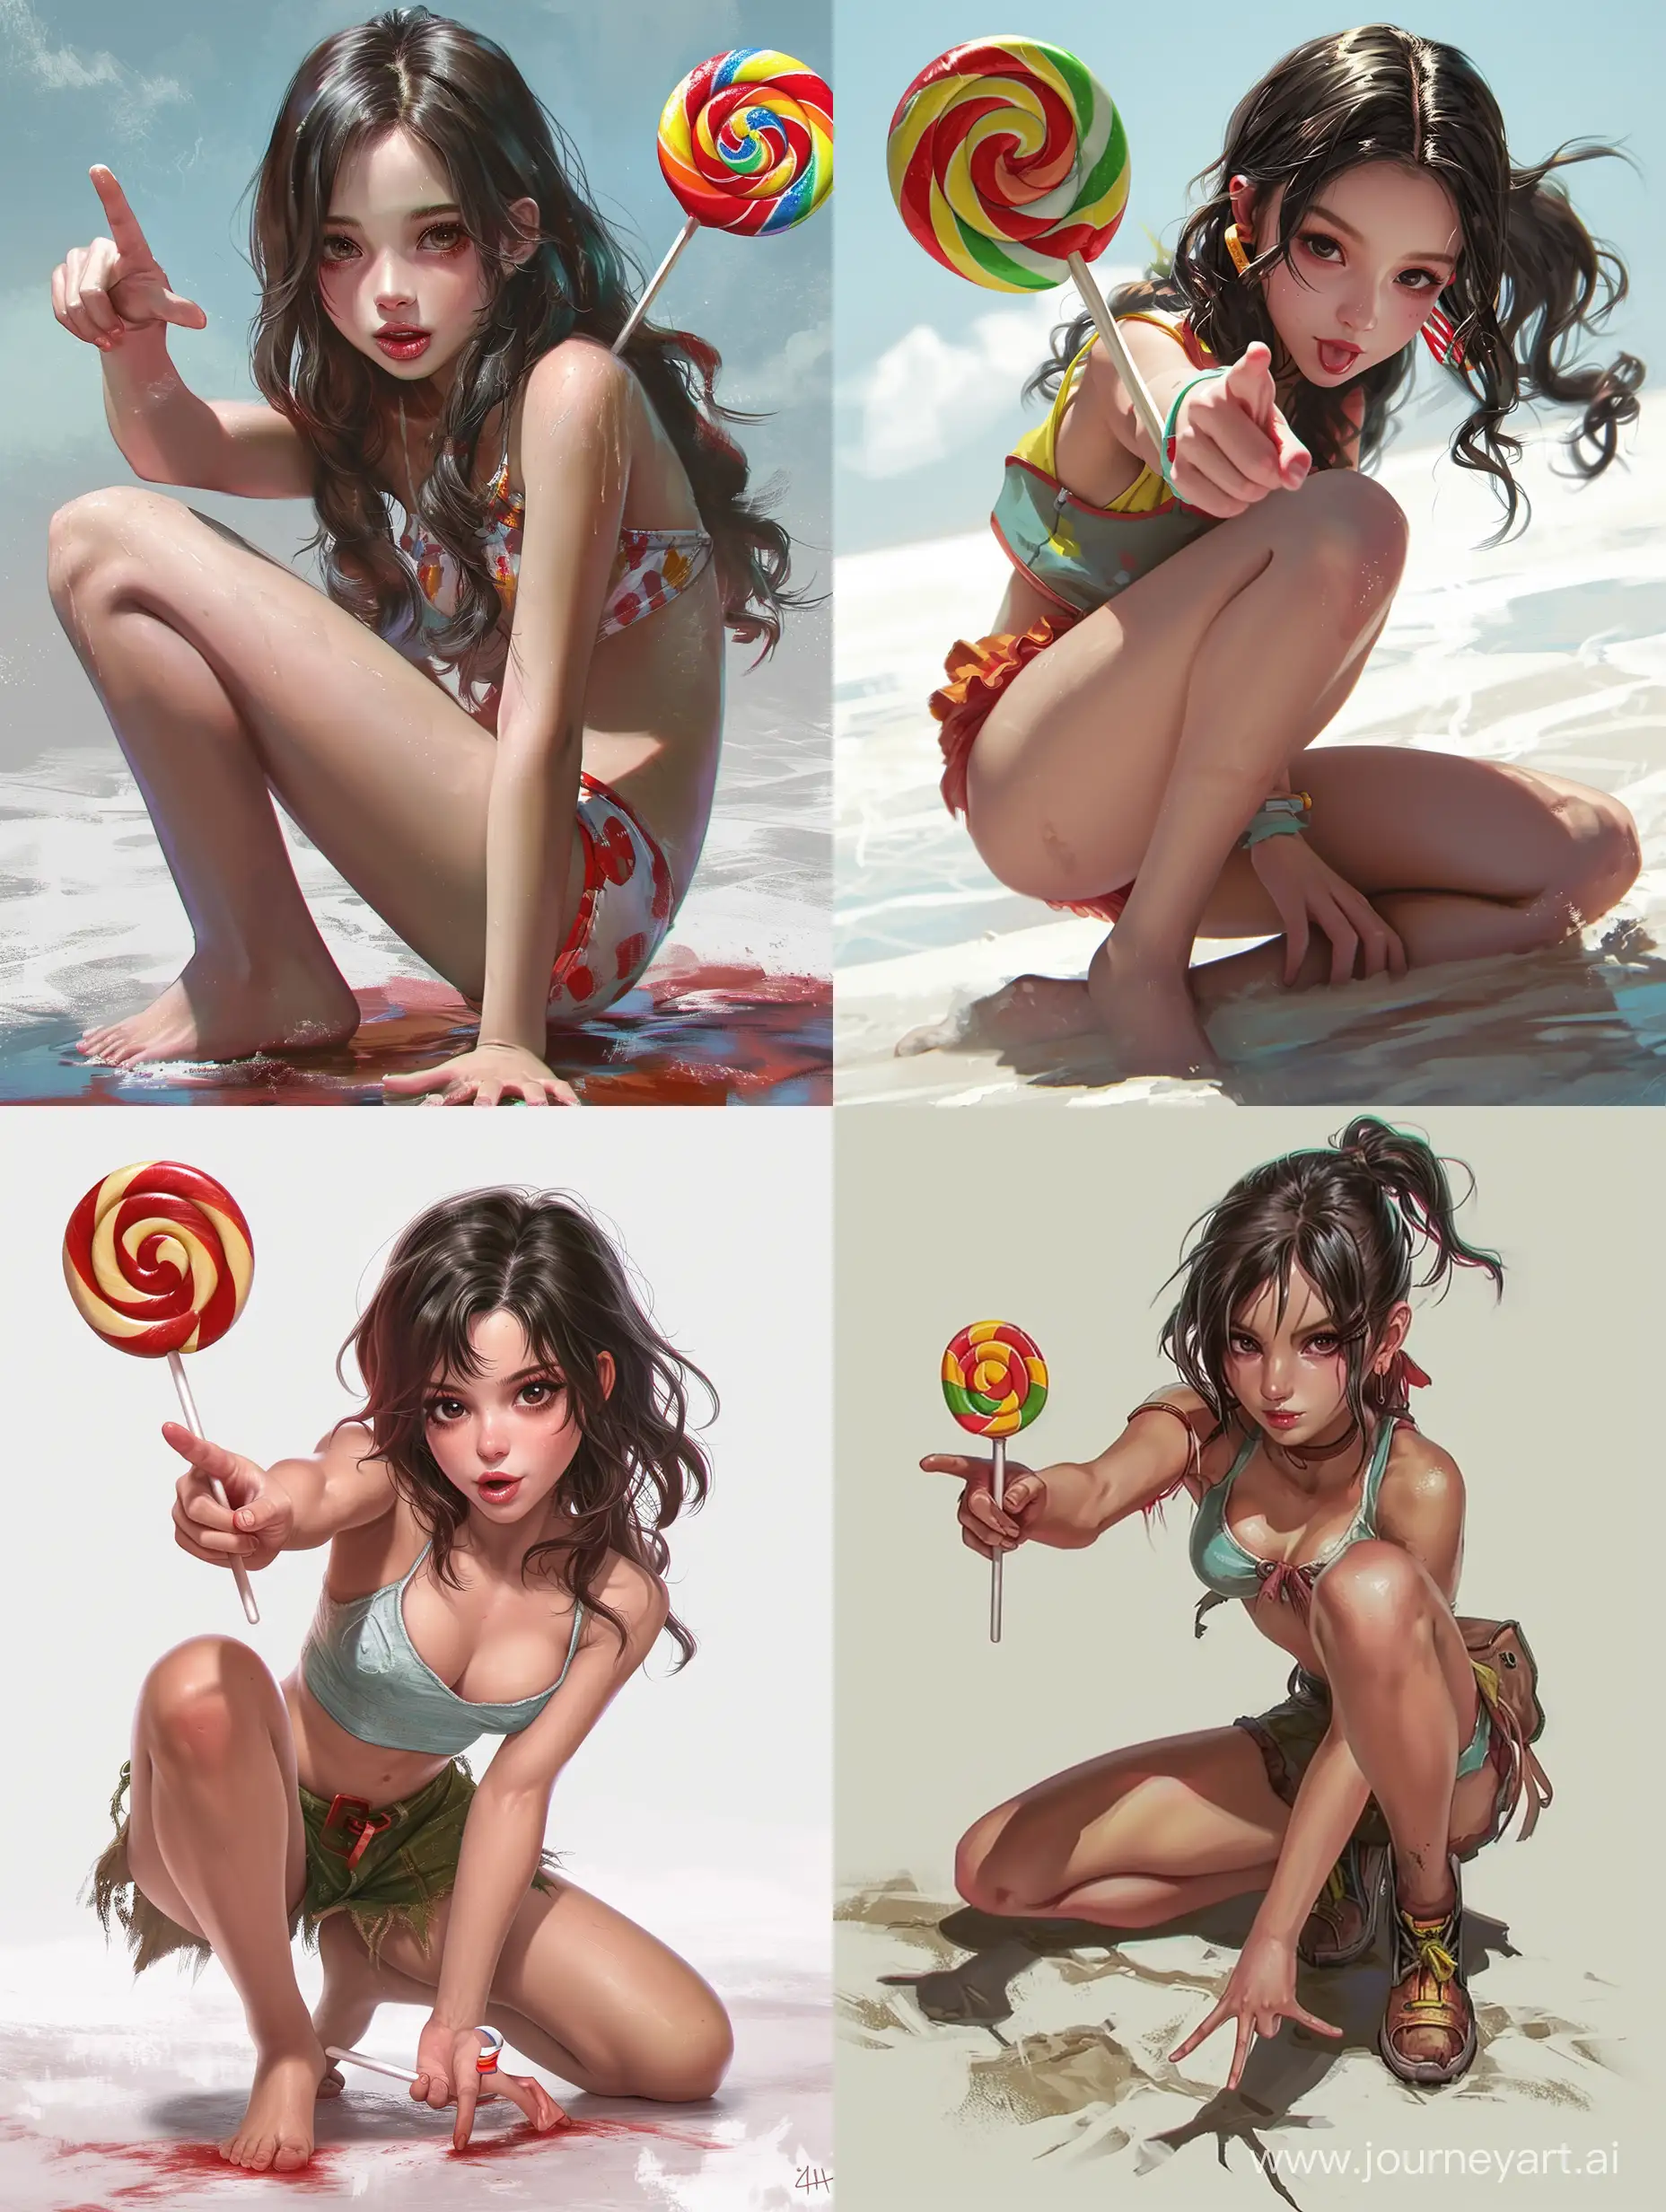 Cute-Girl-with-Lollipop-in-Playful-Pose-Detailed-Digital-Art